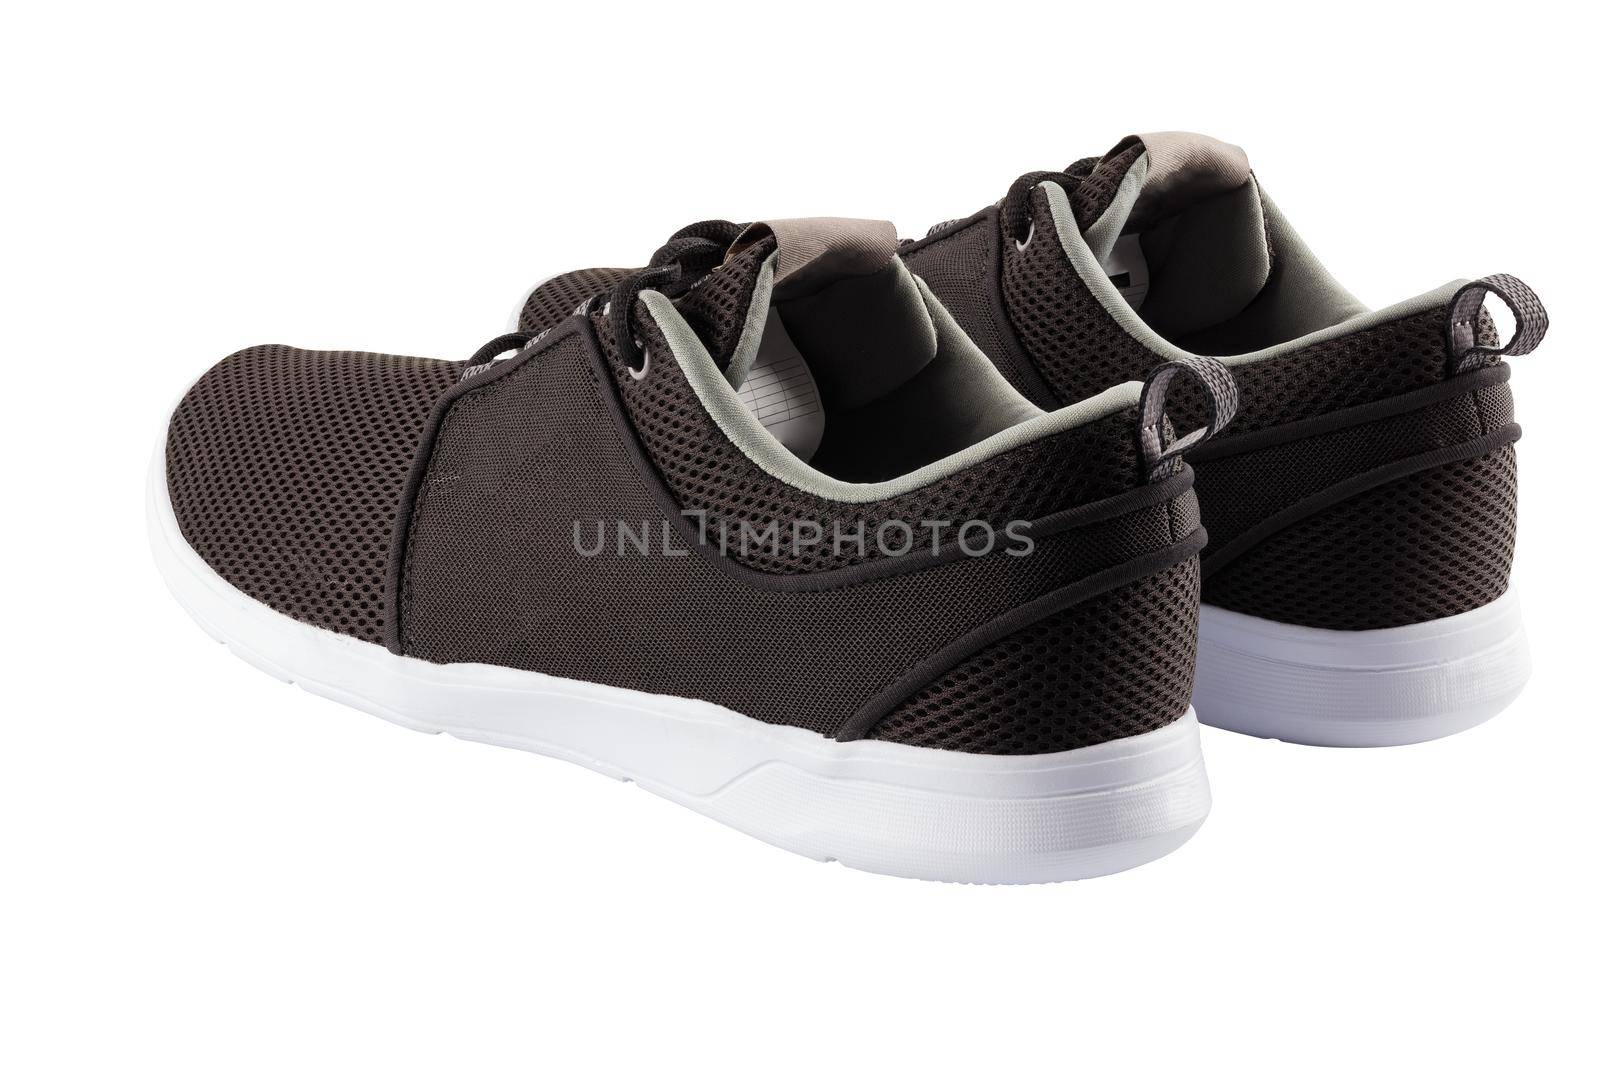 pair of black airmesh summer walking lightweight shoes isolated on white background.